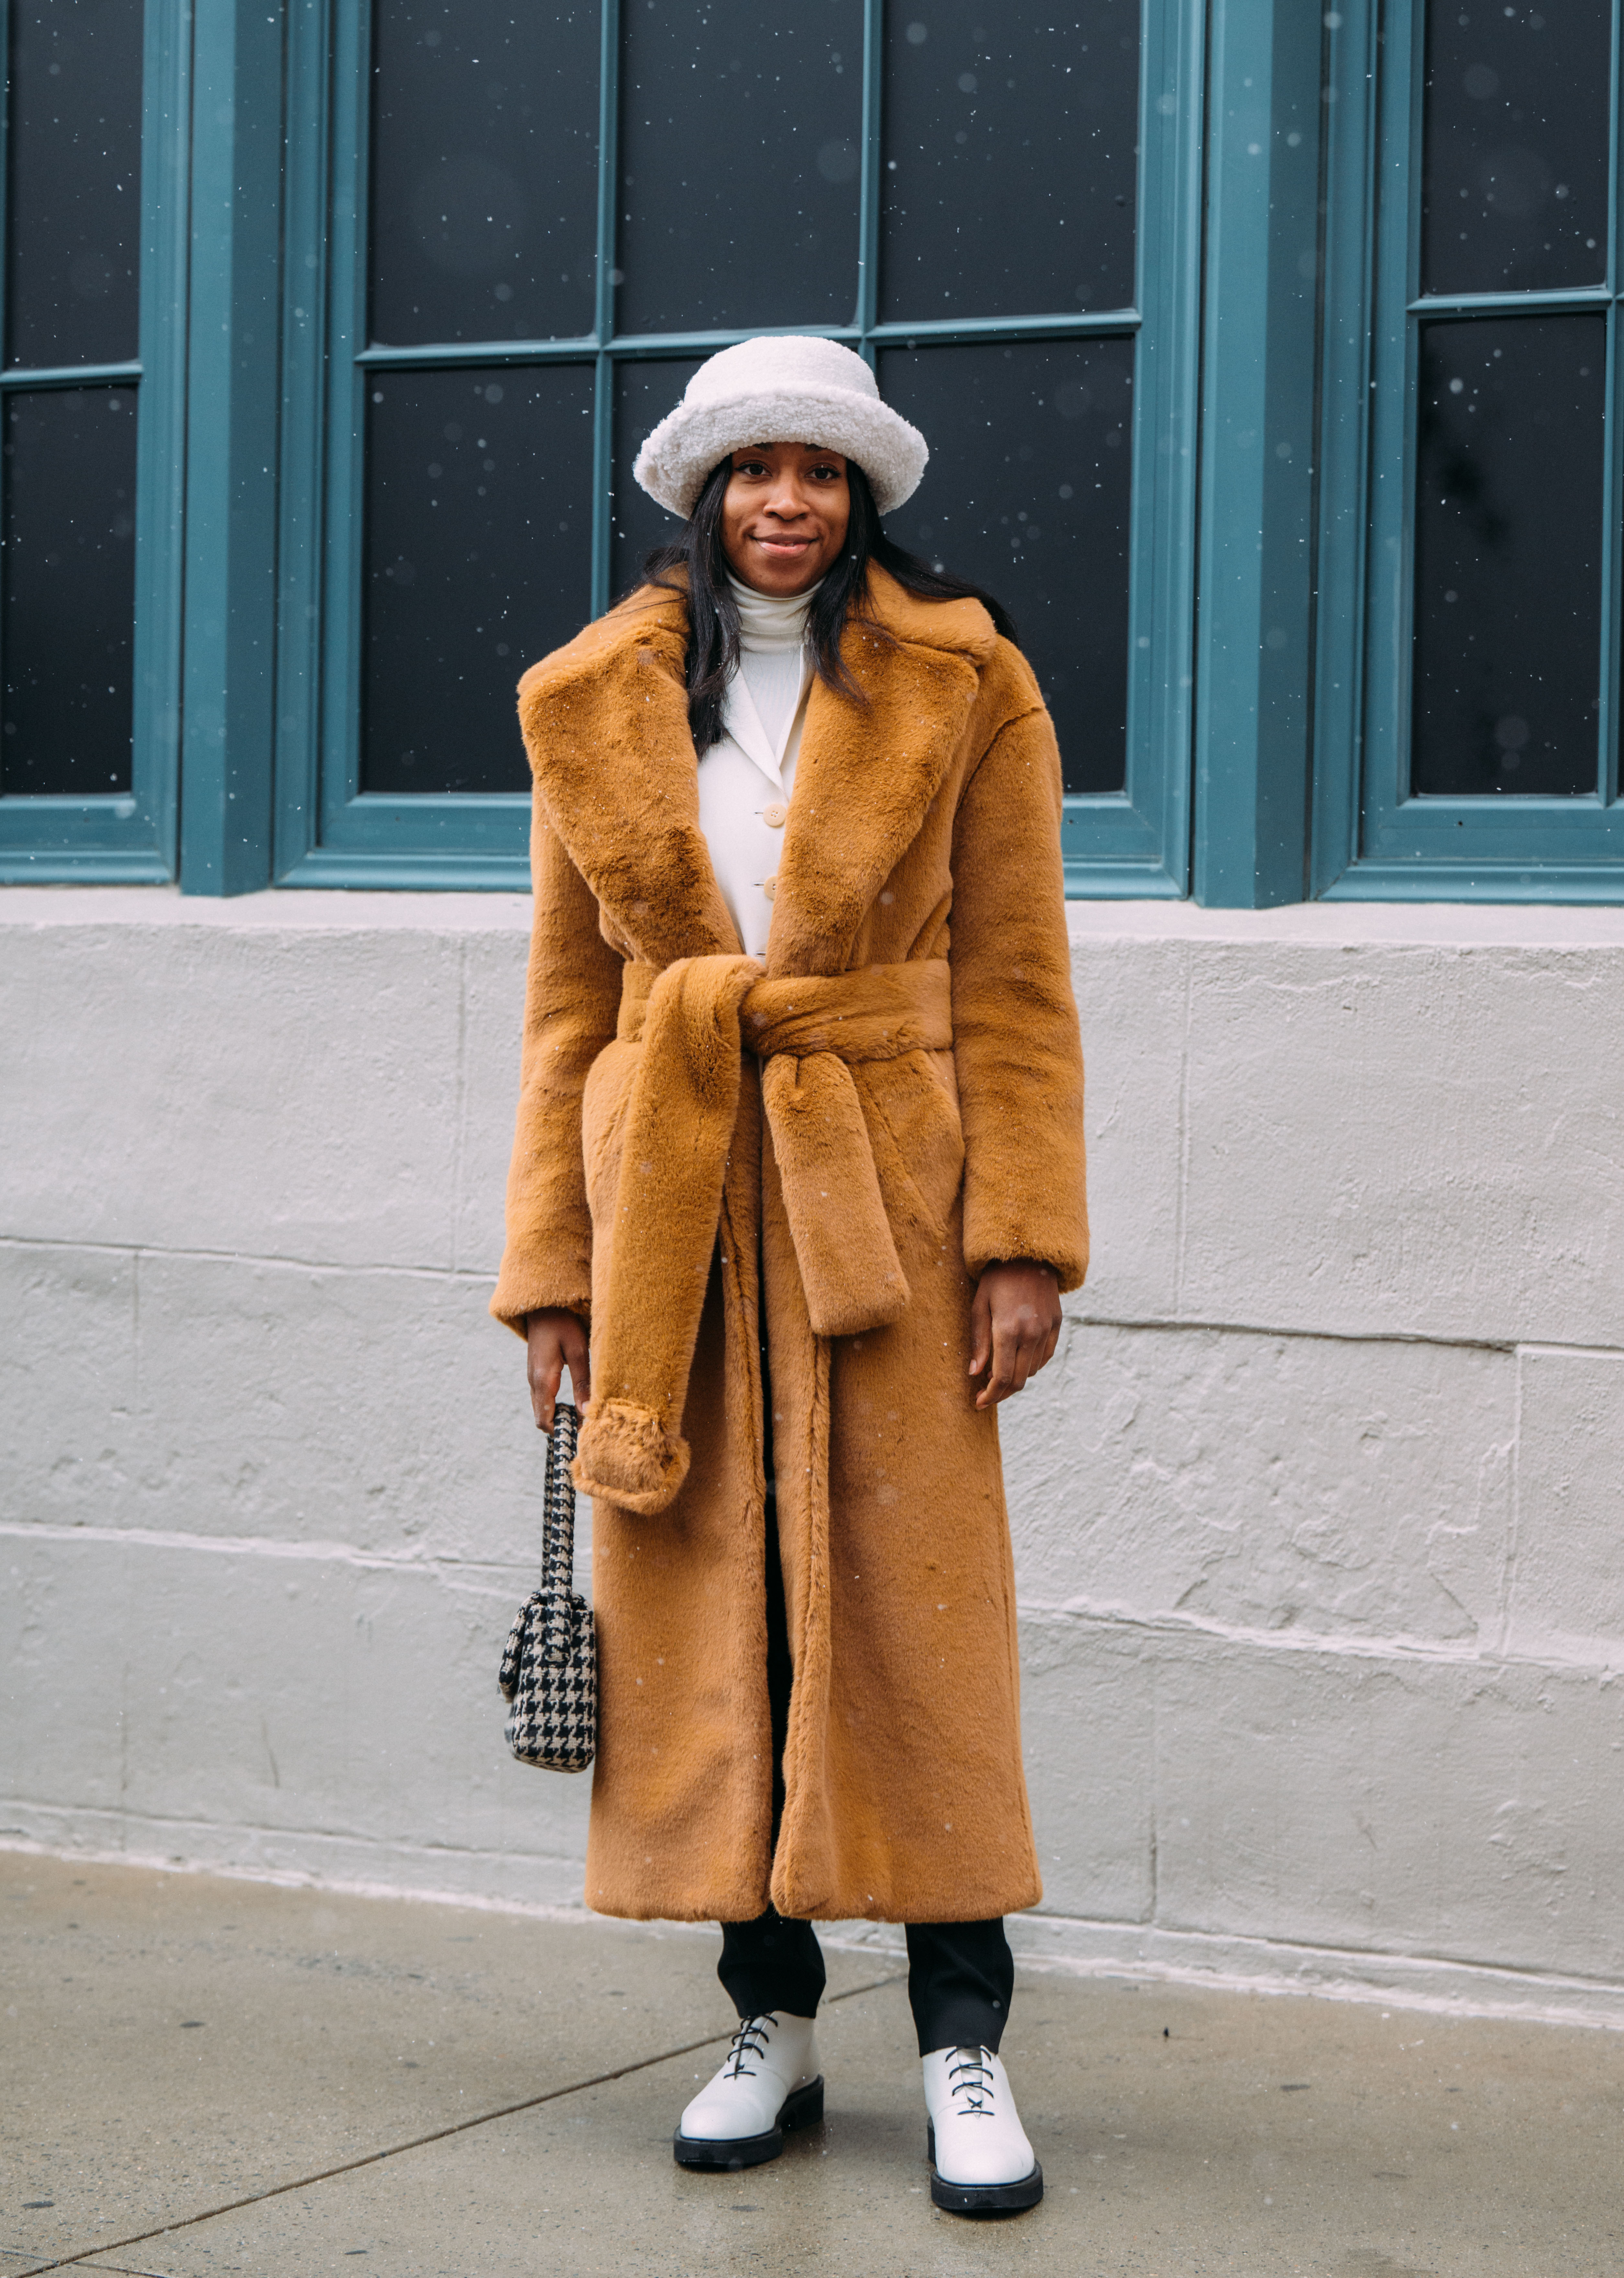 Coat Trends That Will Dominate This Winter 2022 | Who What Wear